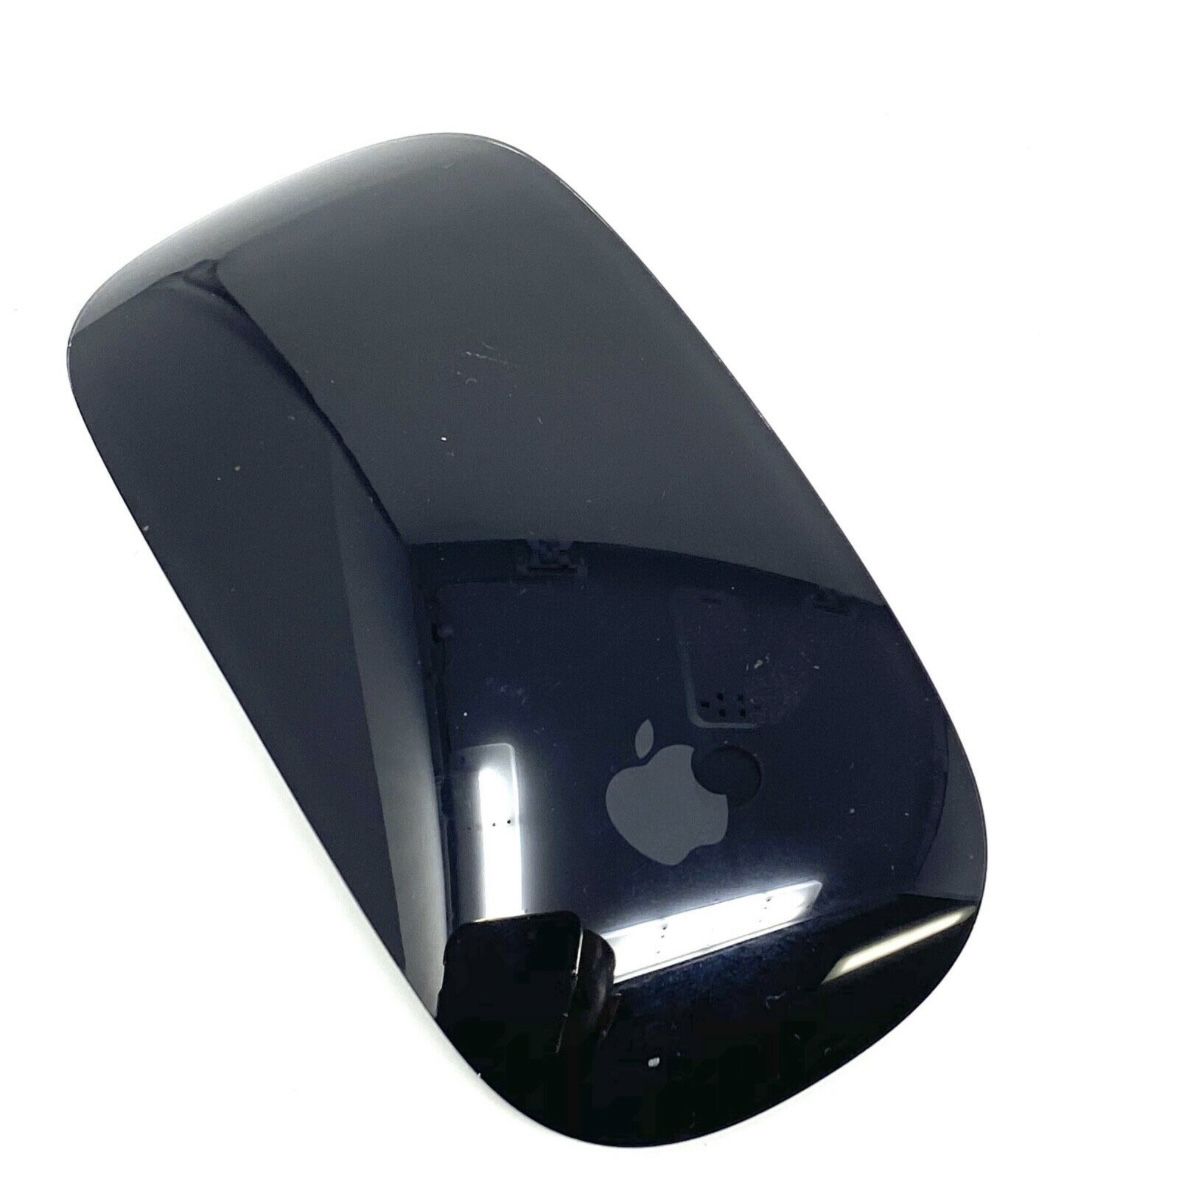 MOUSE - Apple Magic Mouse 2 - Wireless 